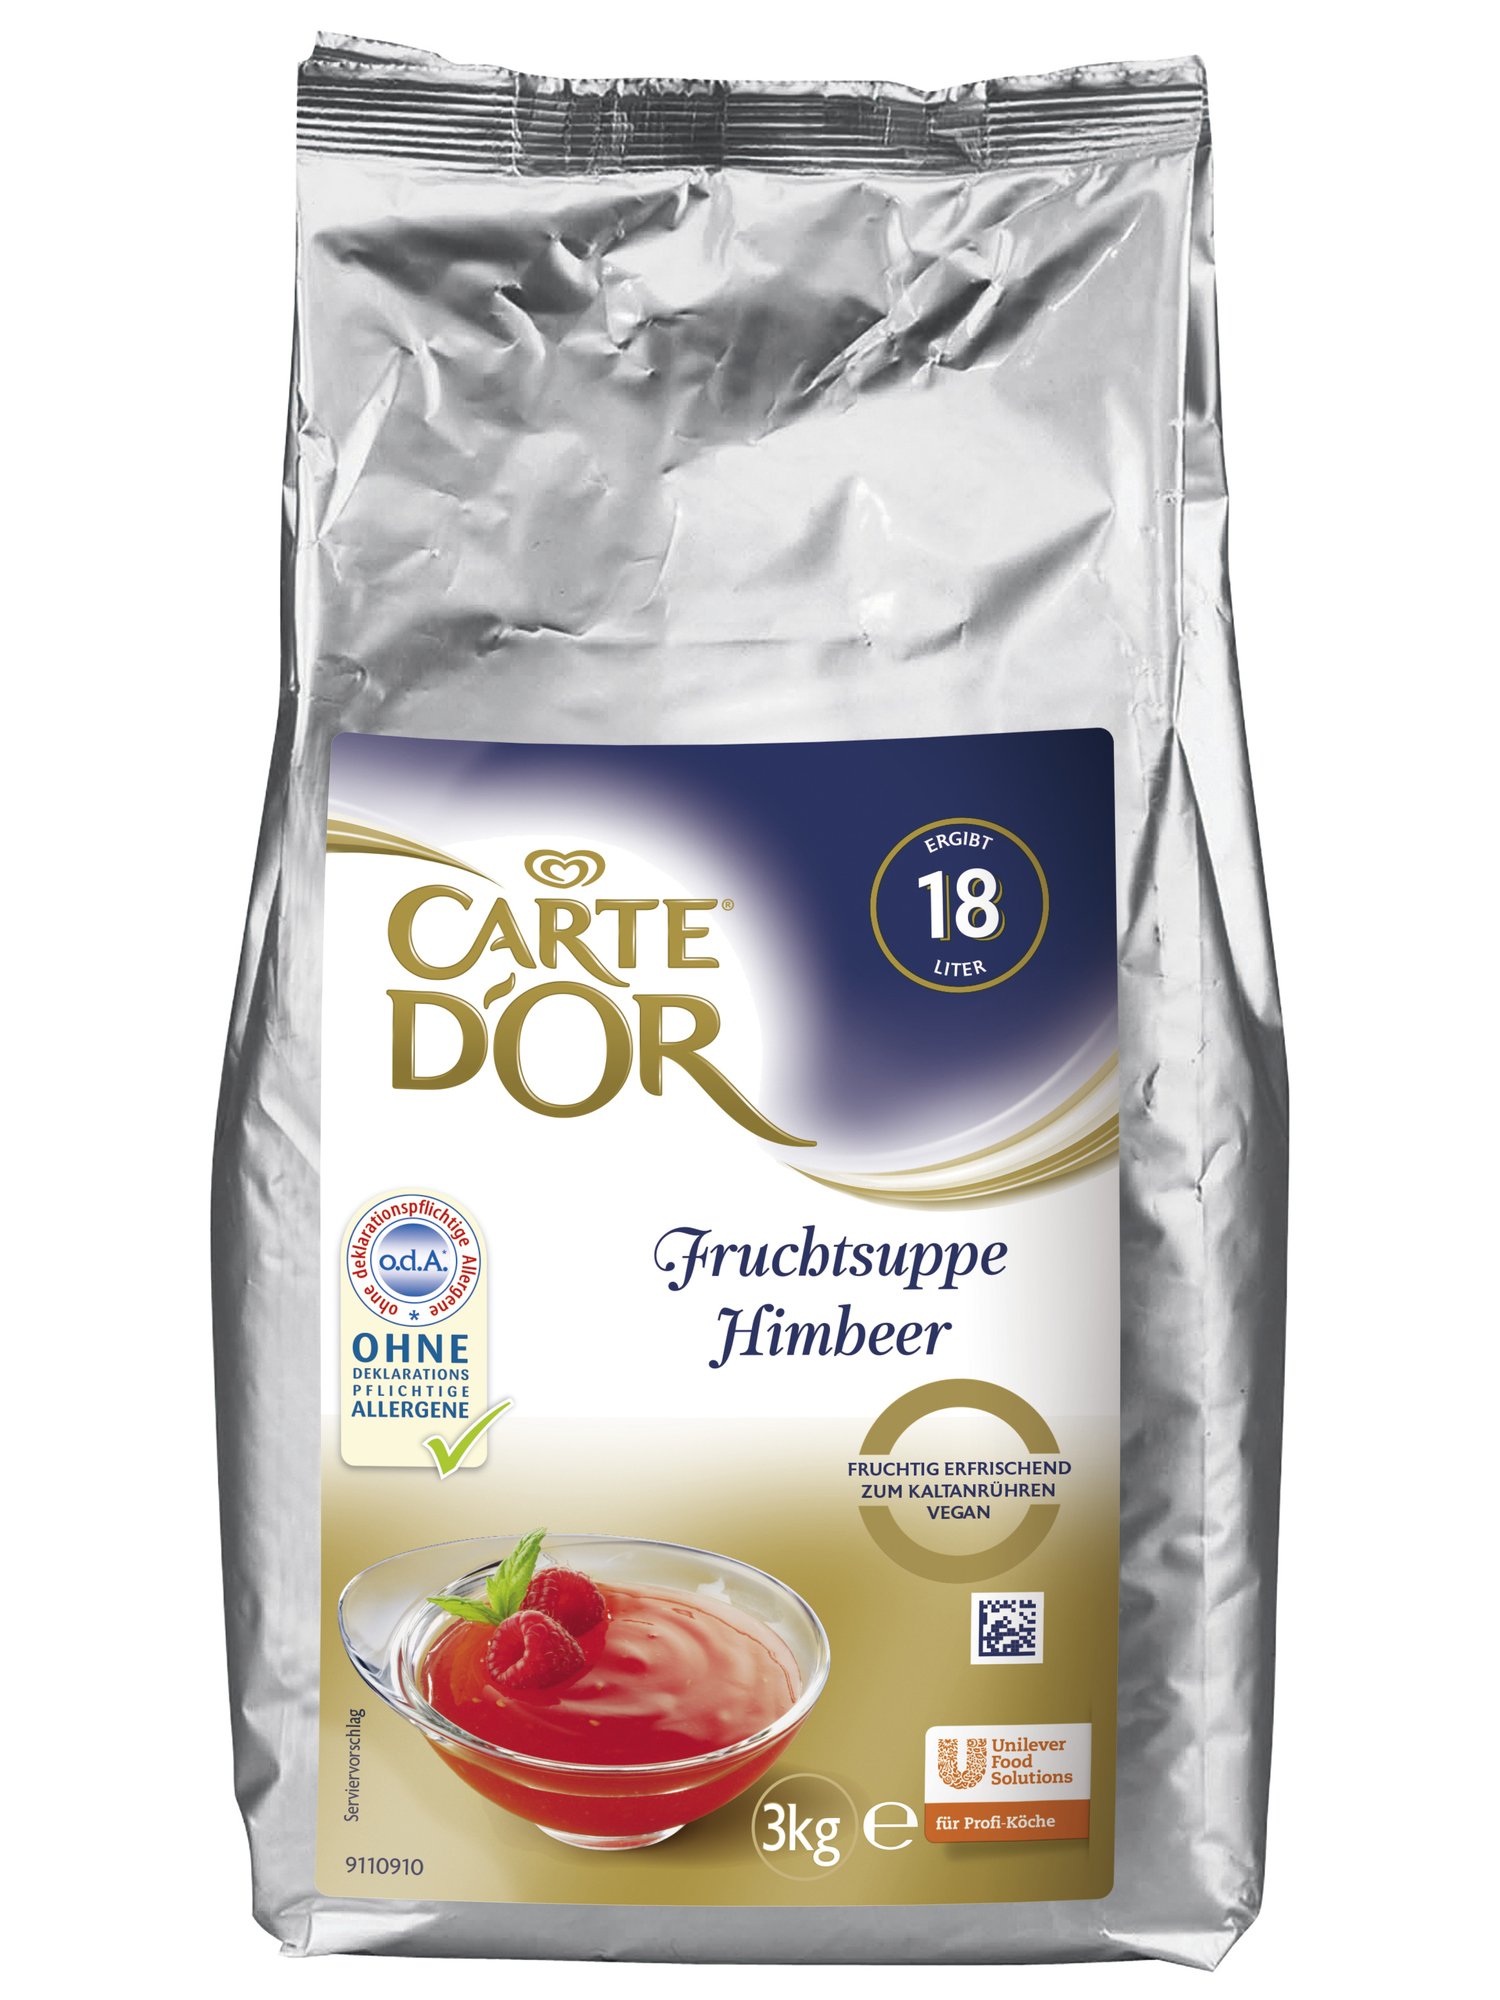 Fruchtsuppe Himbeere 3000g